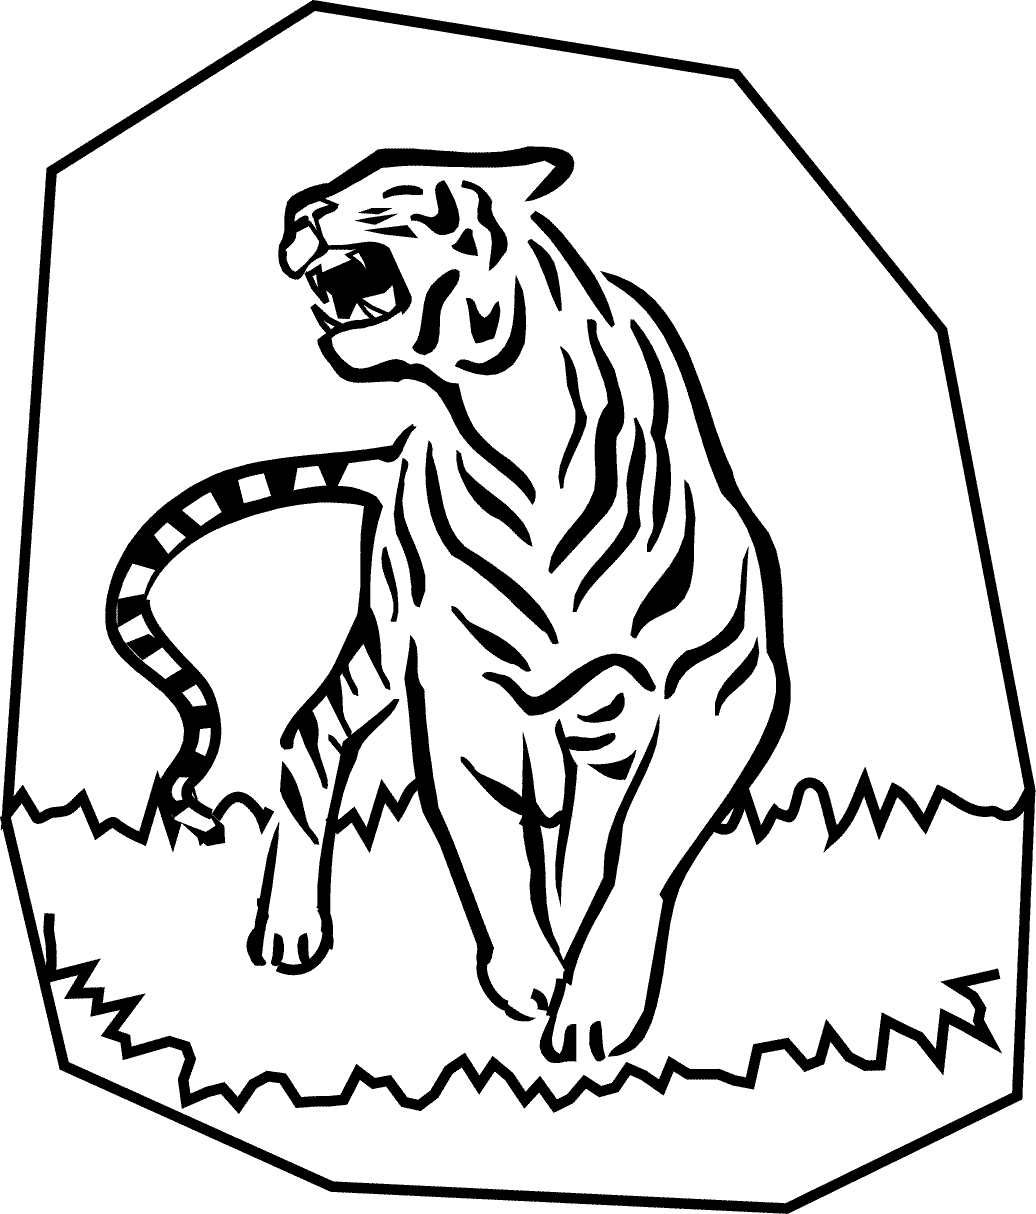 coloring page tiger tiger coloring pages to download and print for free page coloring tiger 